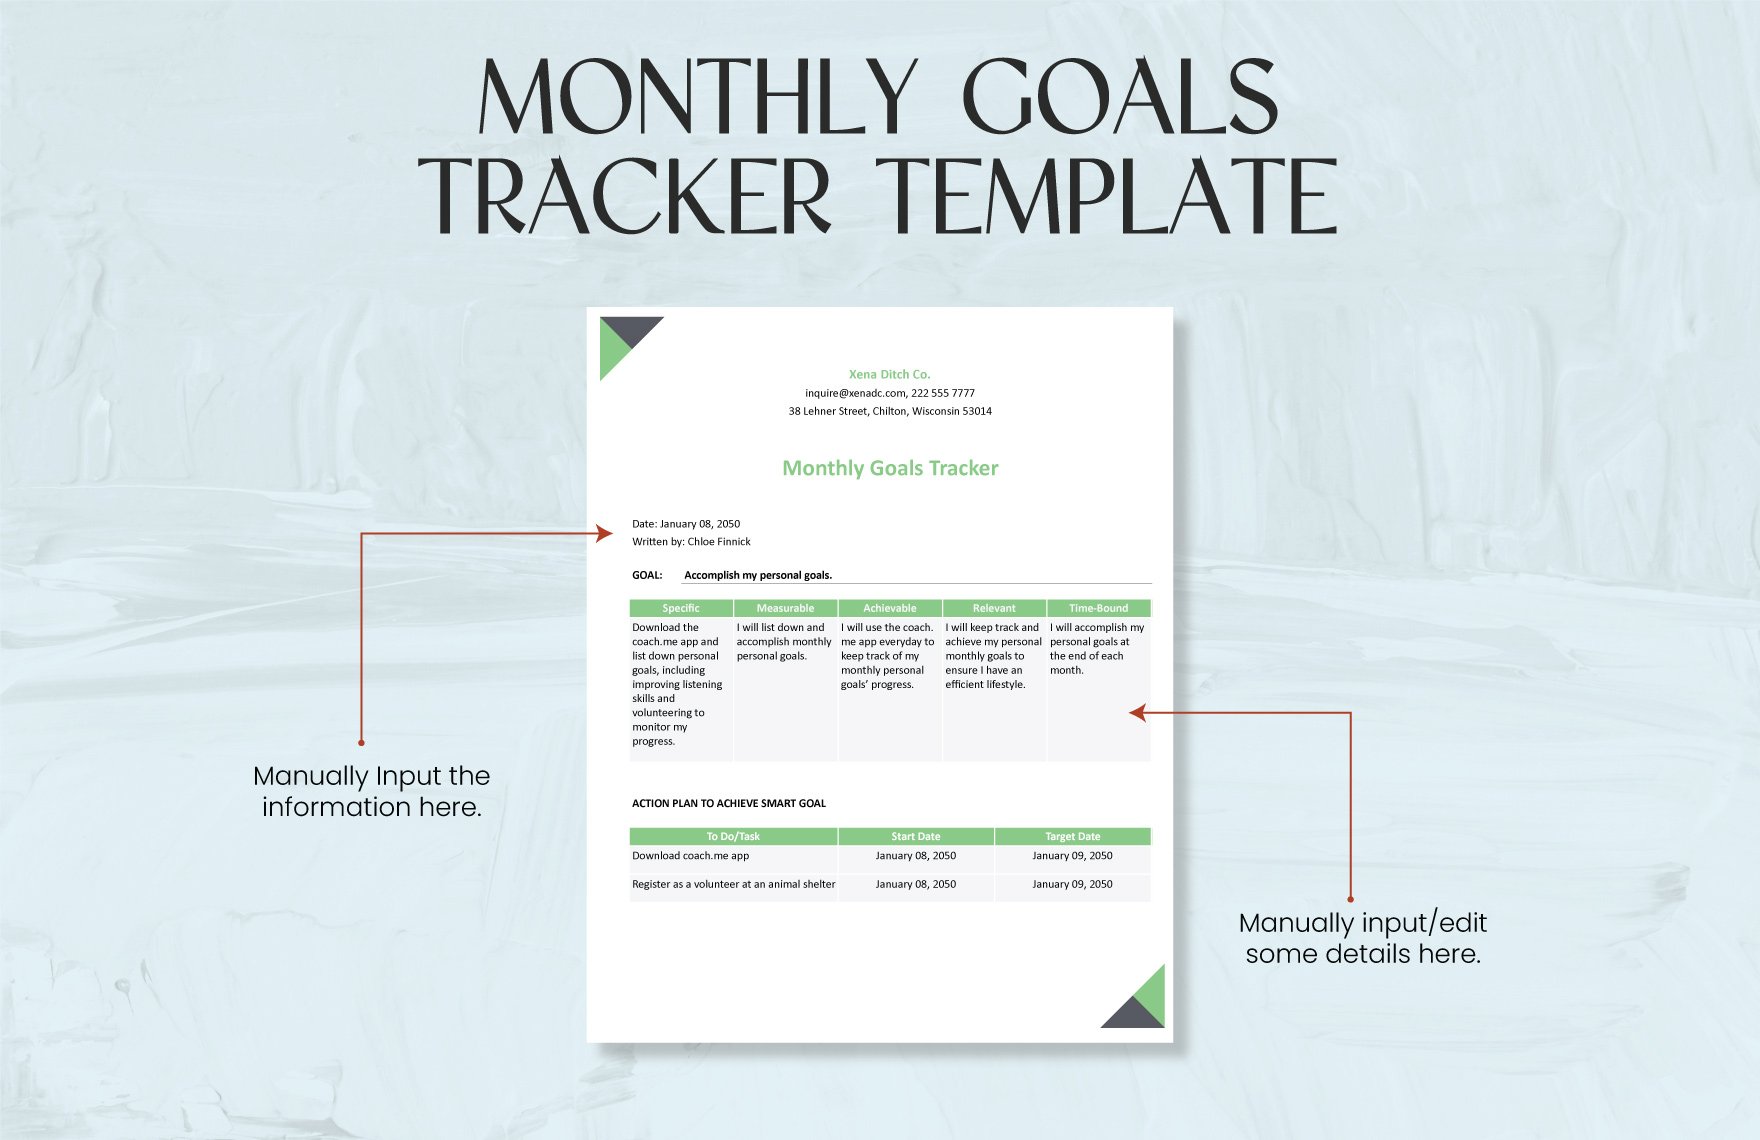 Monthly Goals Tracker Template